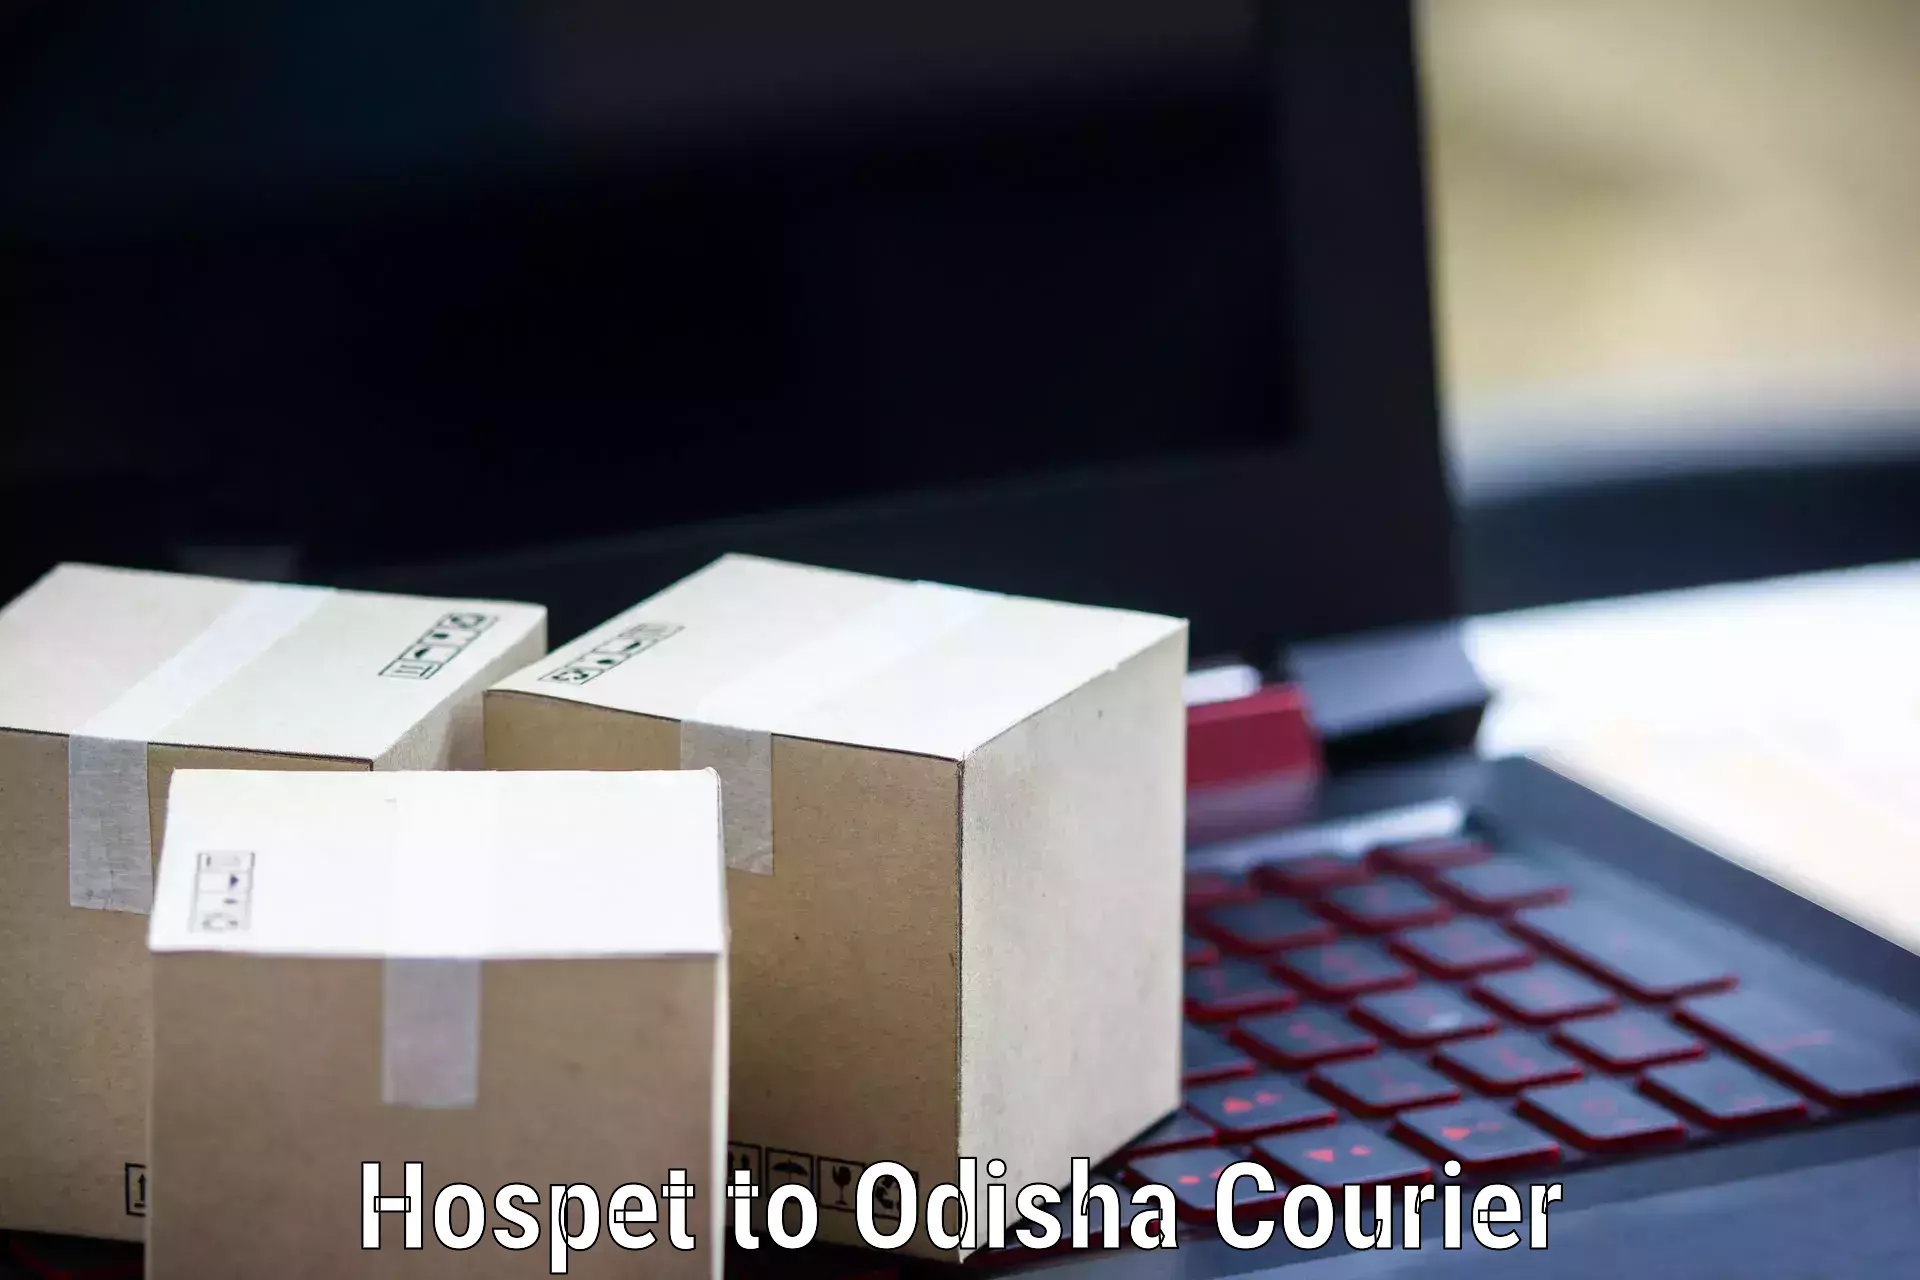 State-of-the-art courier technology in Hospet to Paradip